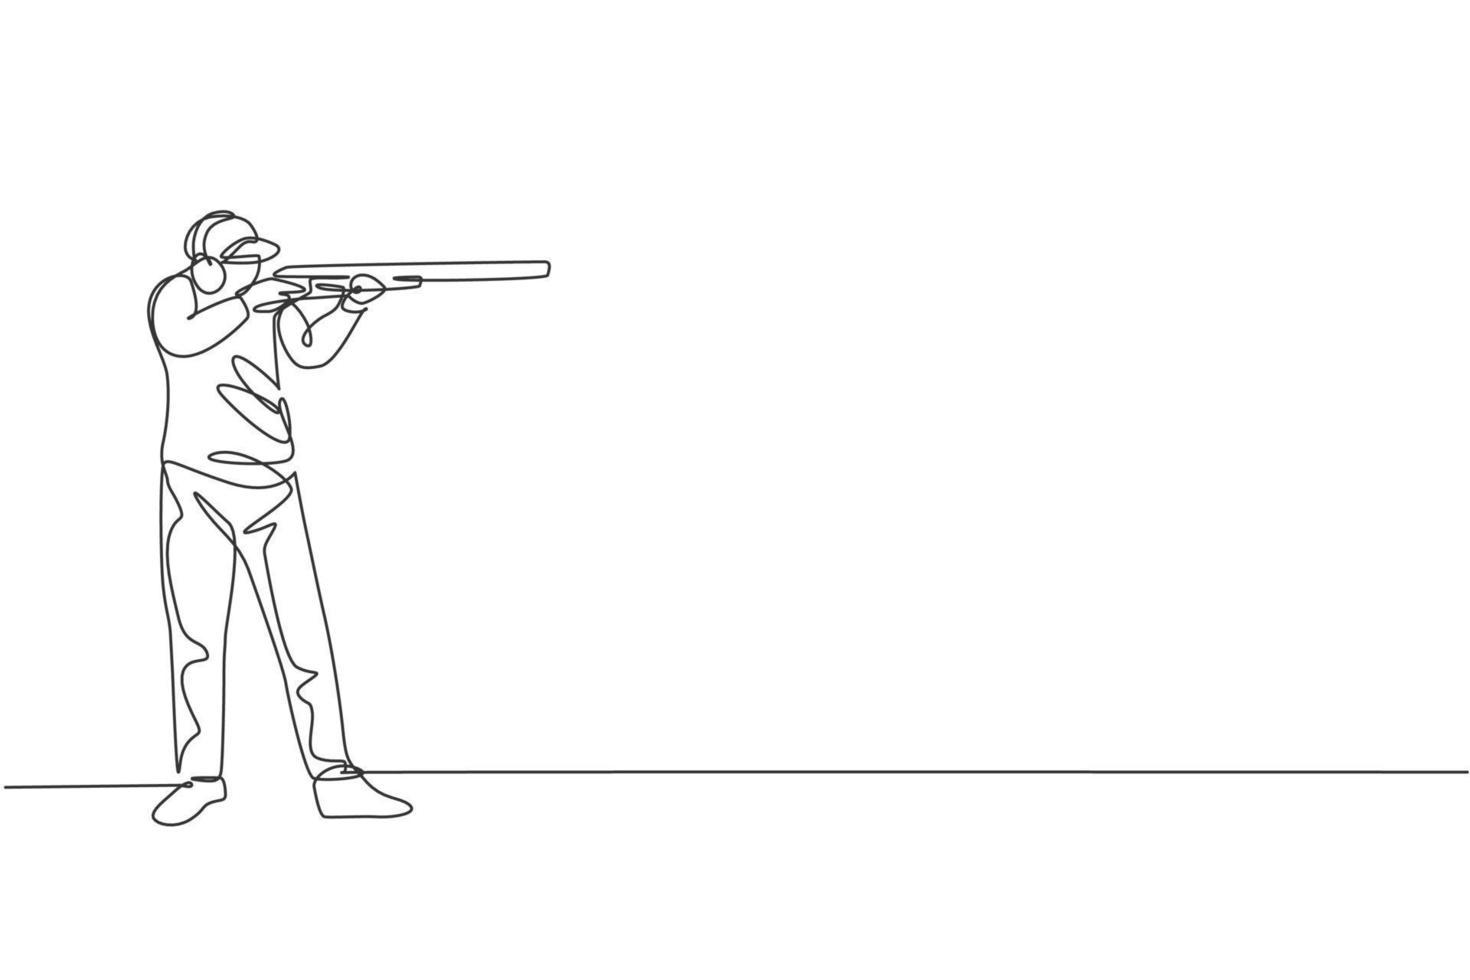 One single line drawing of young man practicing to shot target in range on shooting training ground vector illustration graphic. Clay pigeon shooting sport concept. Modern continuous line draw design